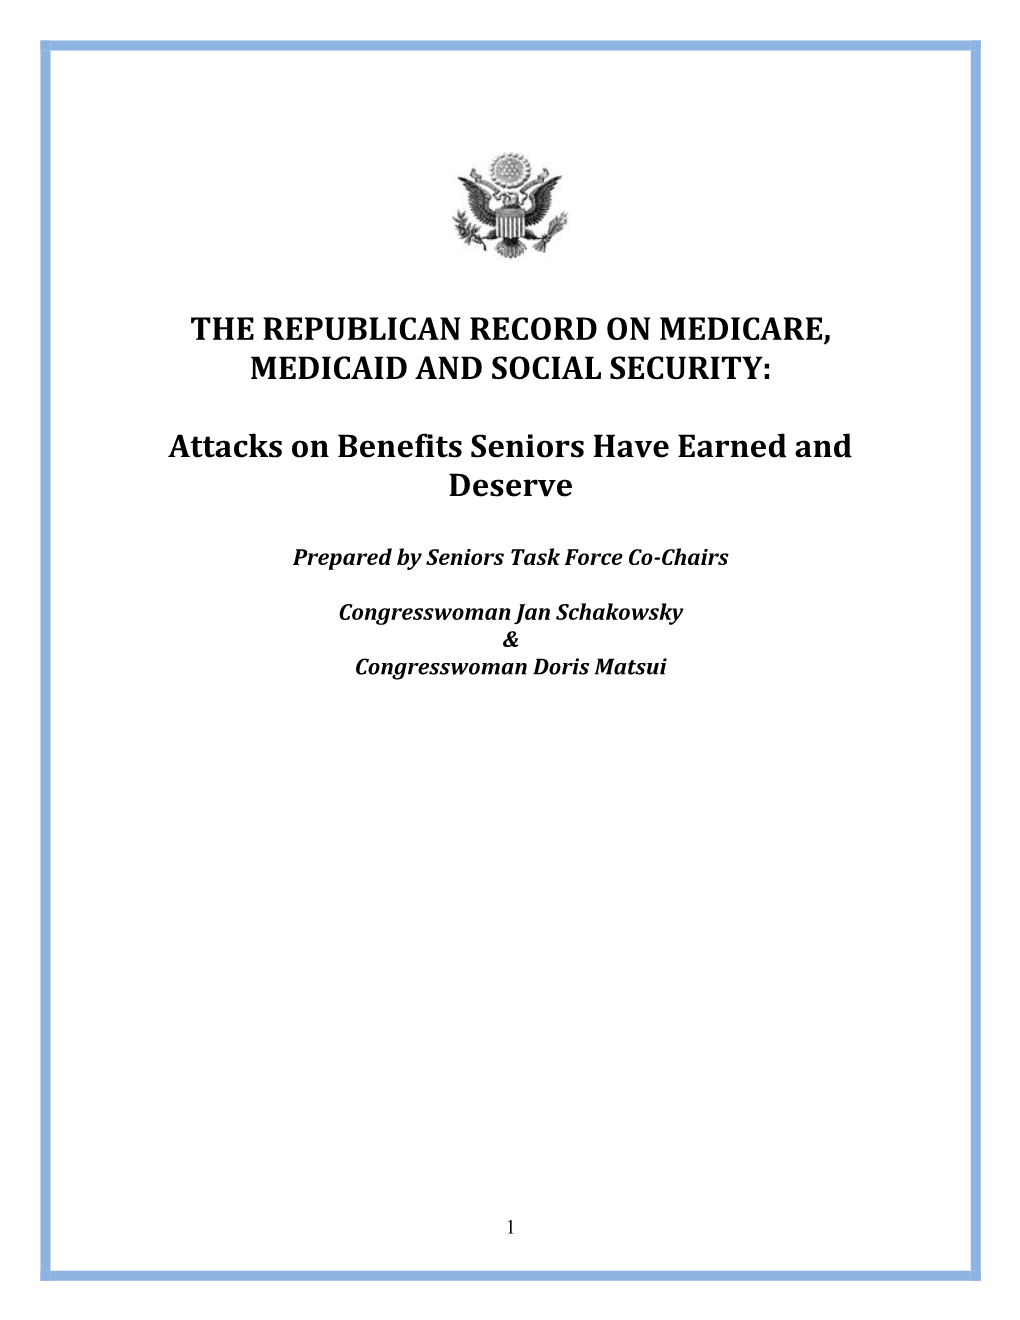 The Republican Record on Medicare, Medicaid and Social Security